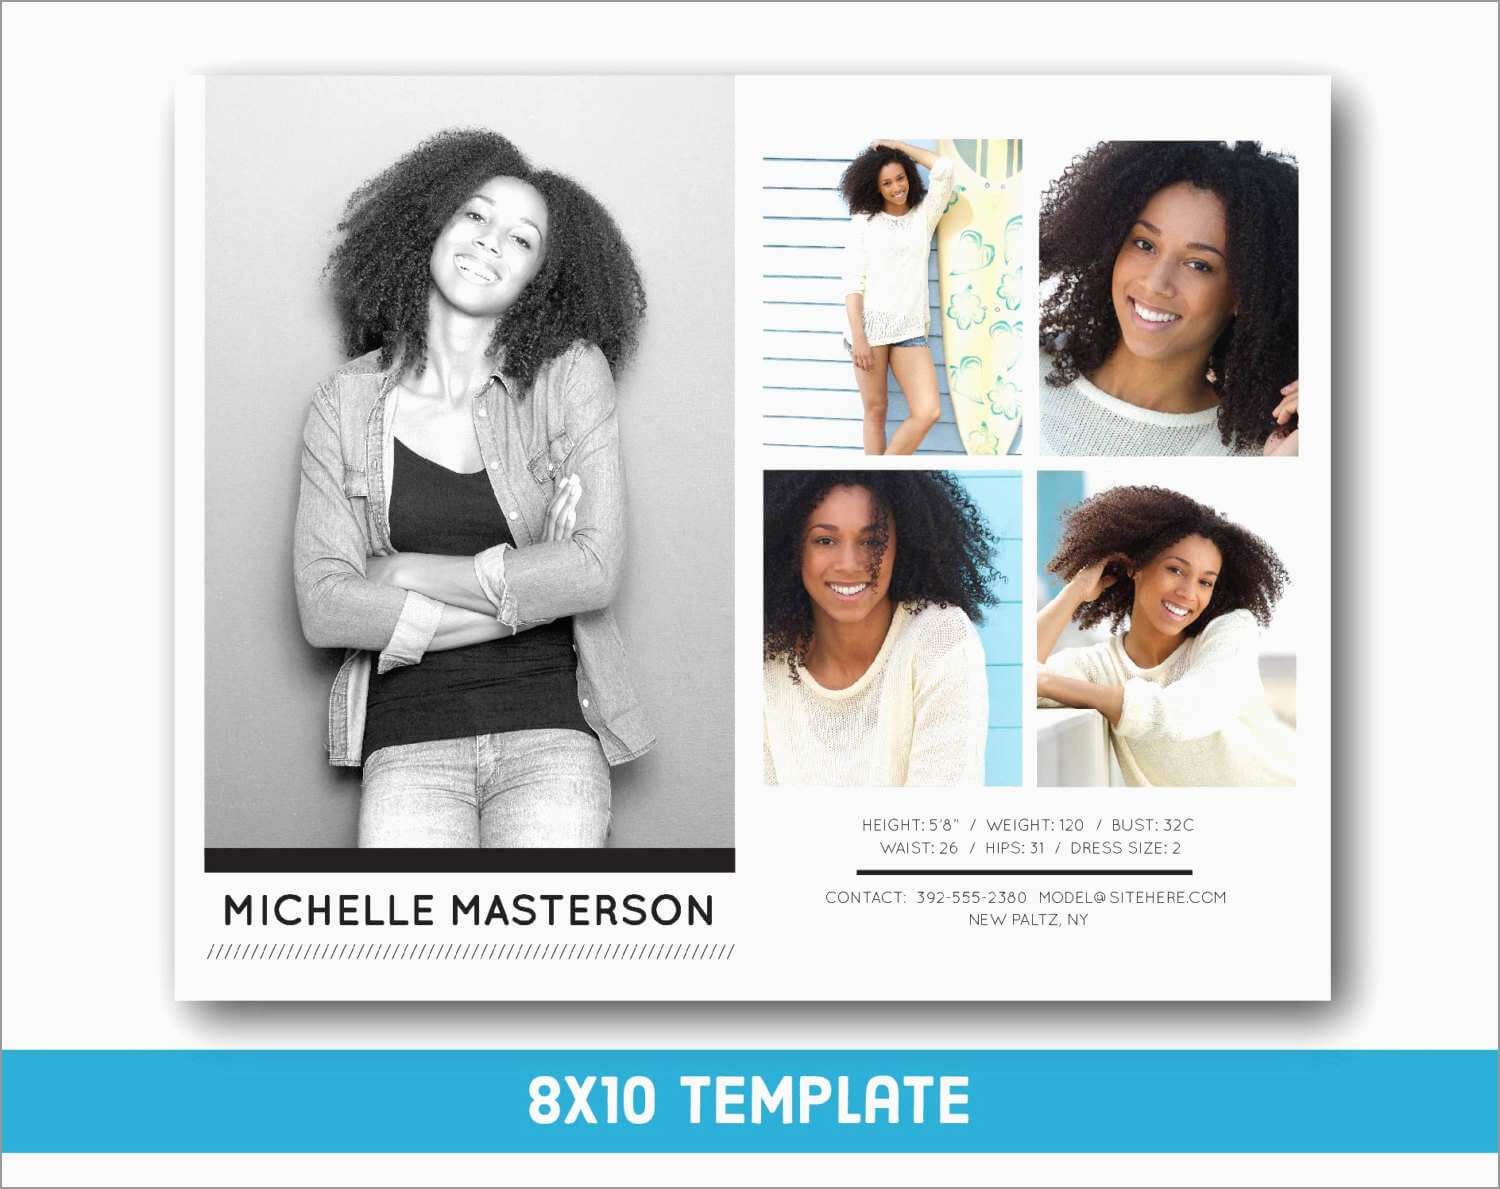 Inspirational Free Comp Card Template | Best Of Template Within Free Model Comp Card Template